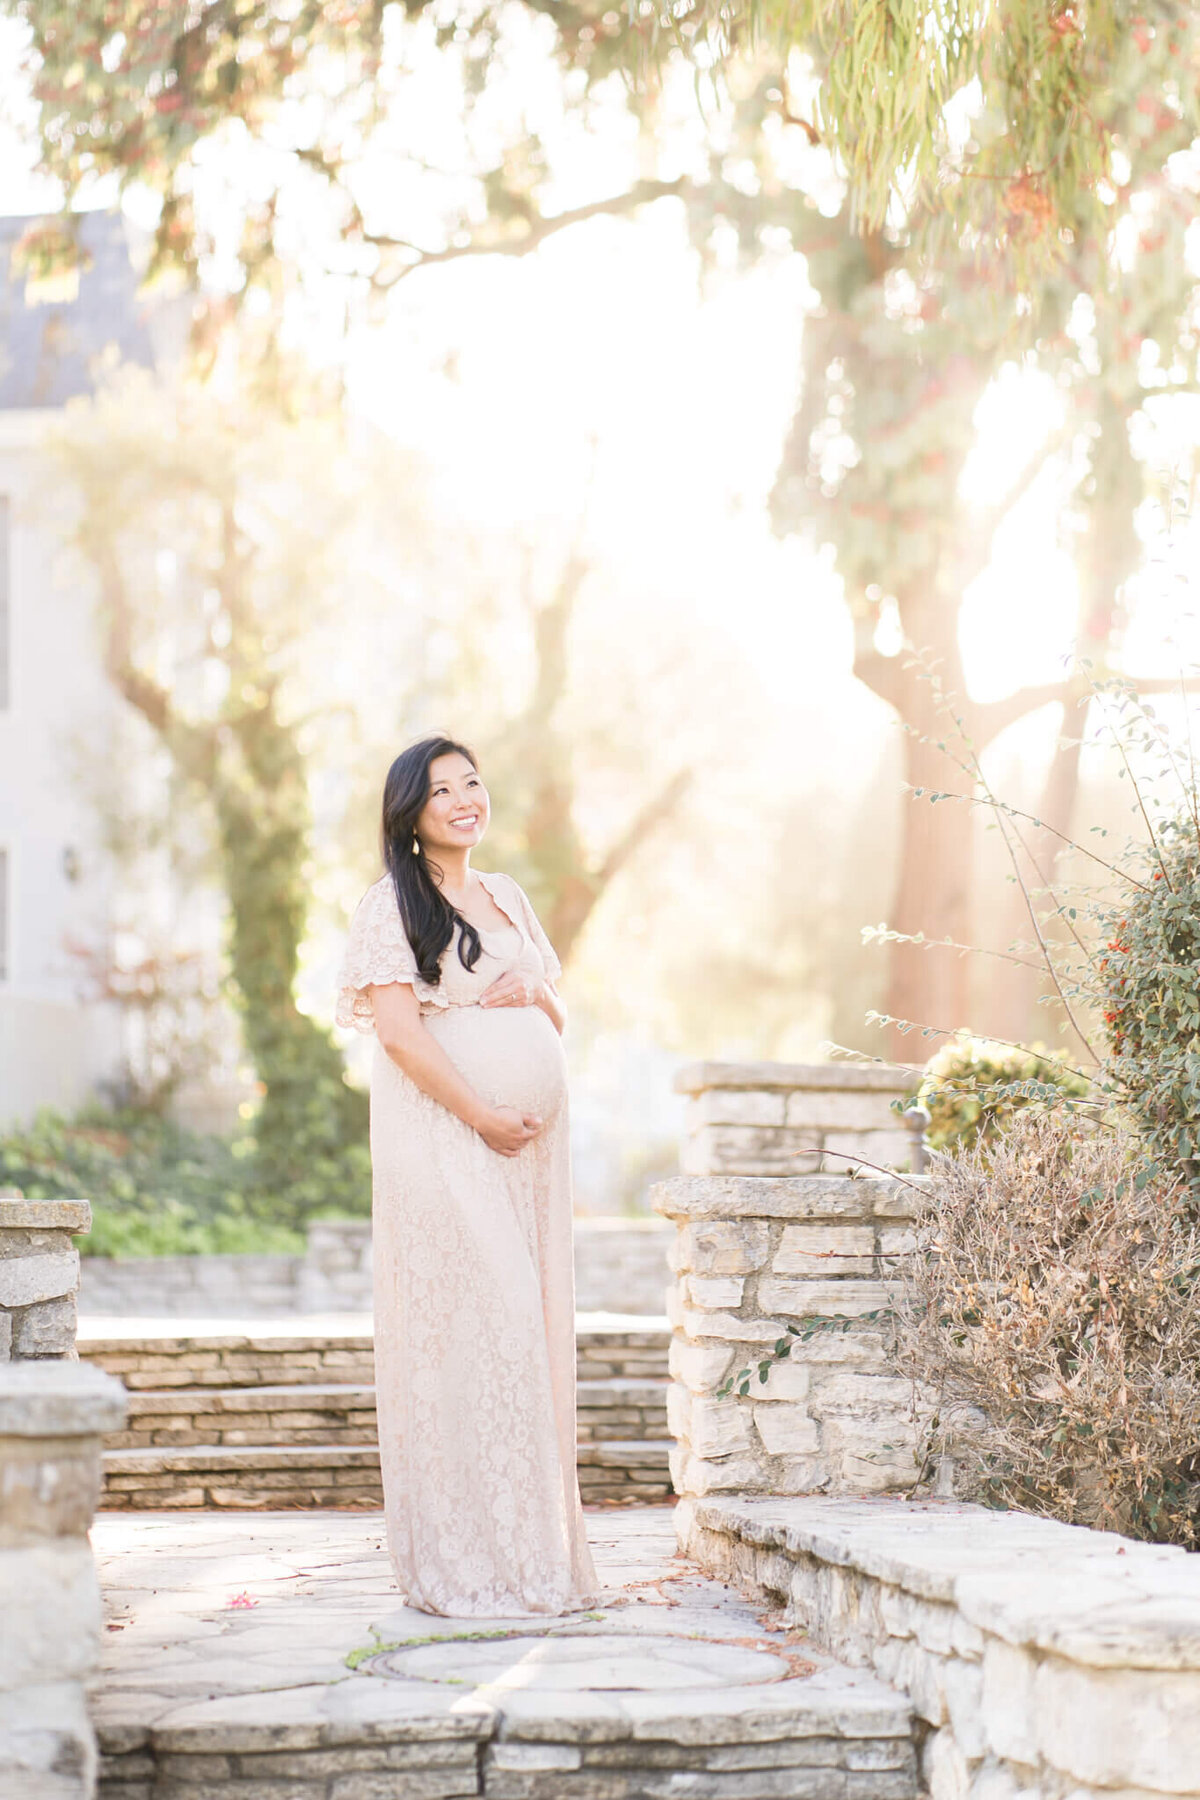 Pregnant mom holding maternity belly standing in brick pathway with glowing sun in the background.  By Orange County maternity photographer Melliemade Photography